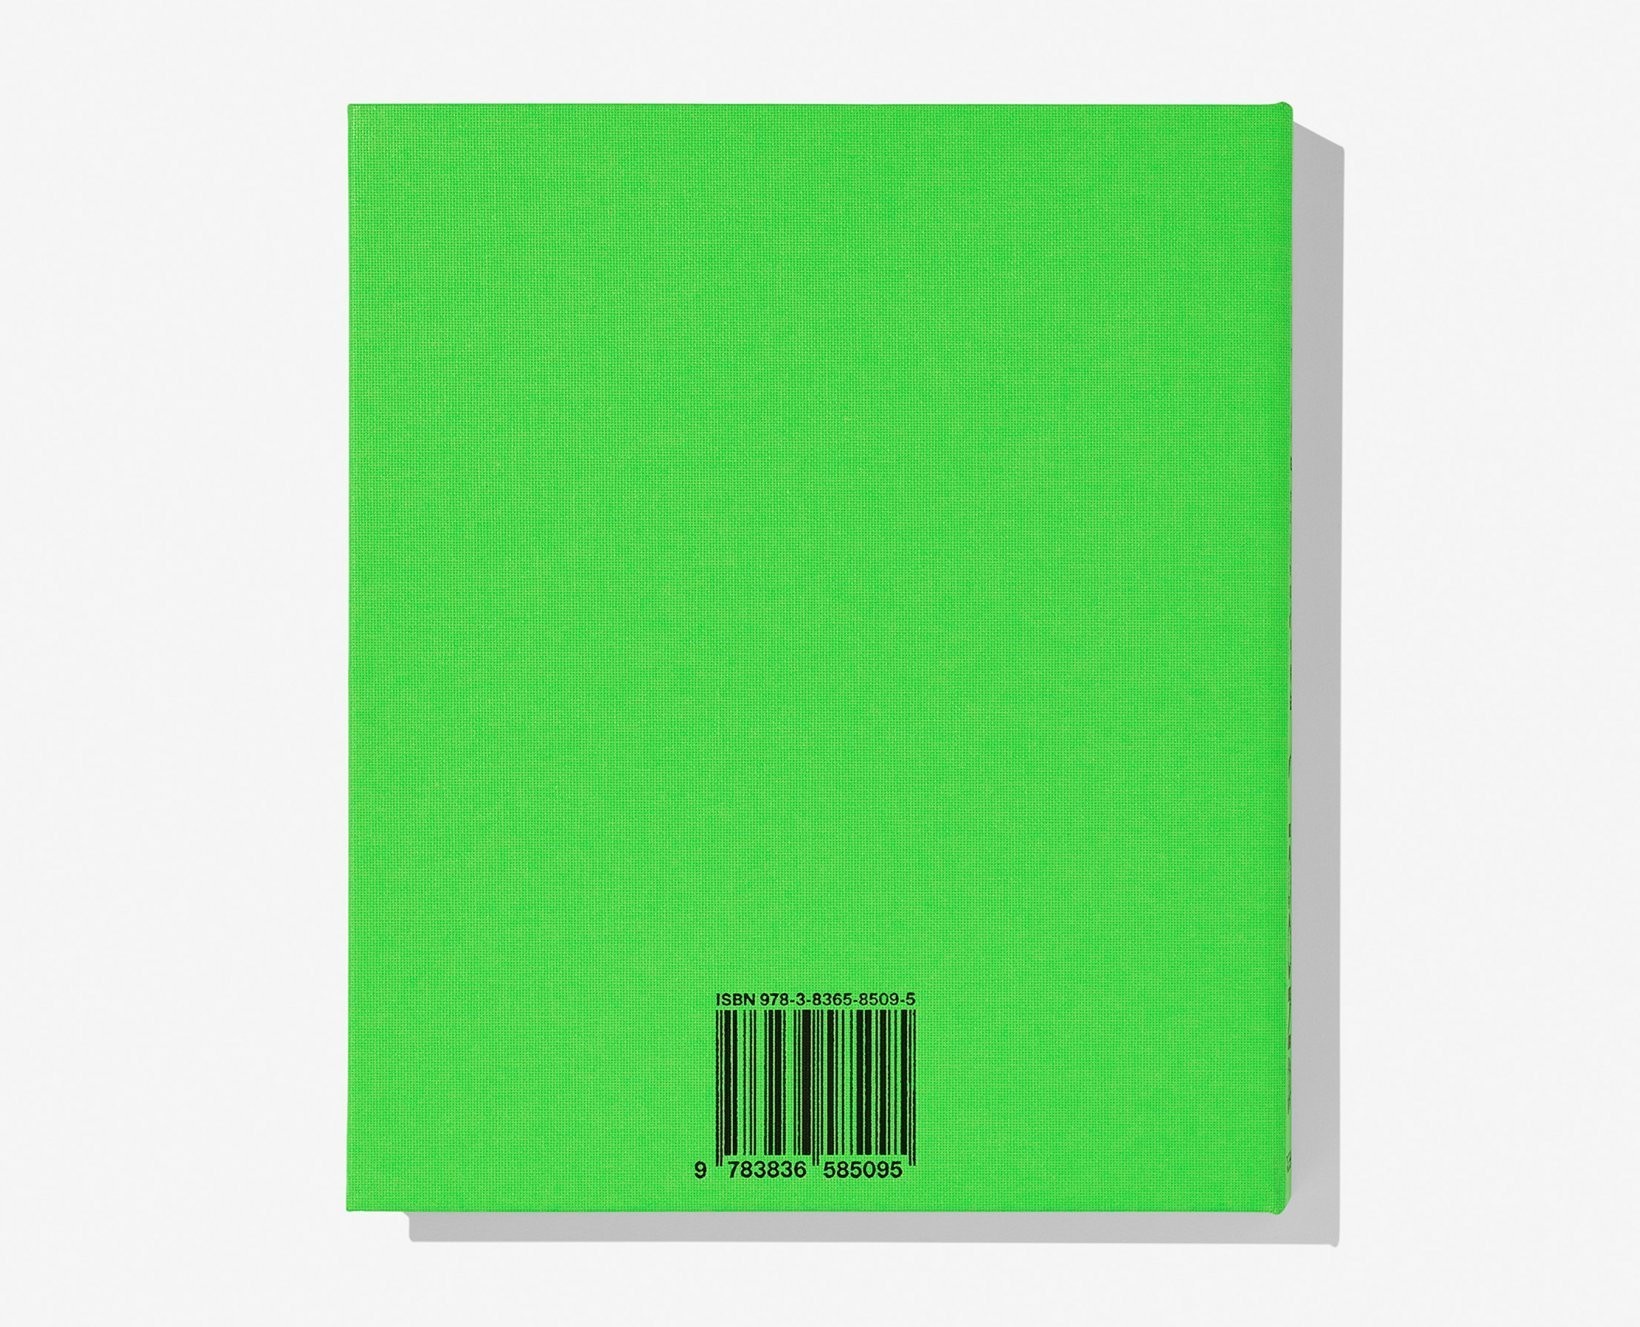 Taschen Virgil Abloh. Nike. ICONS - Limited Edition - 978-3-8365-8509-5